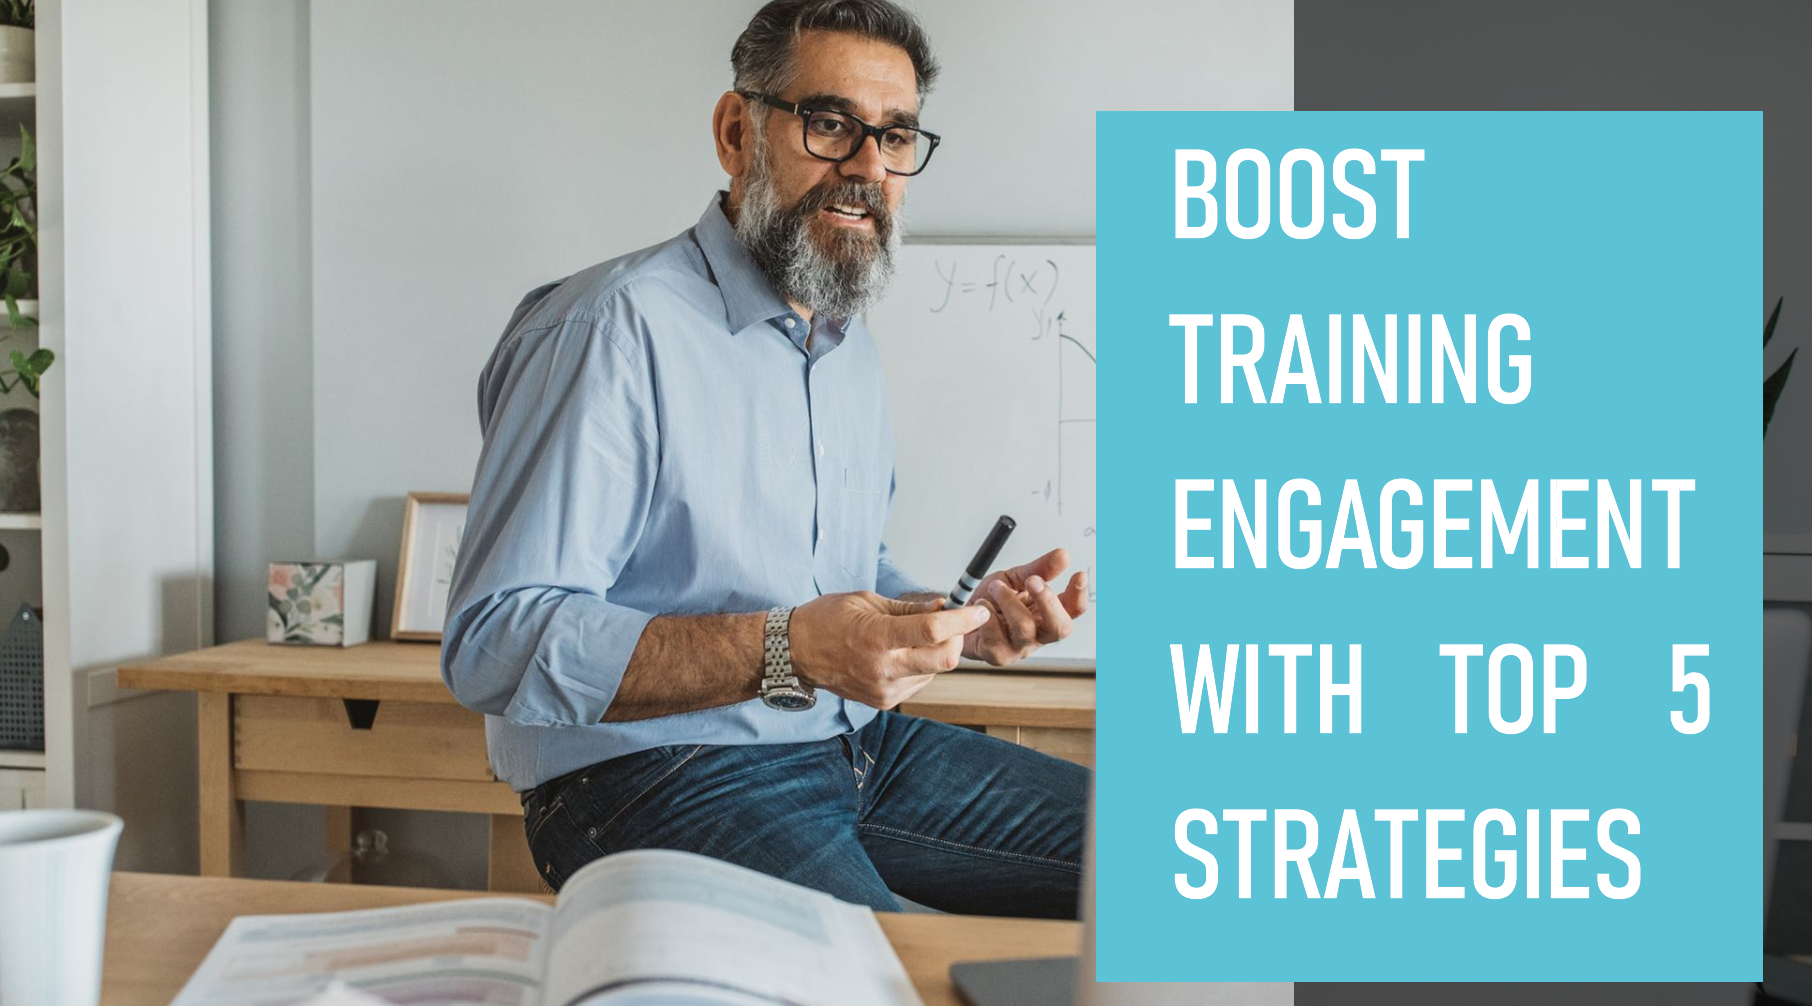 Top 5 Strategies for Best Corporate Training Companies to Boost Engagement in Their Training Programs